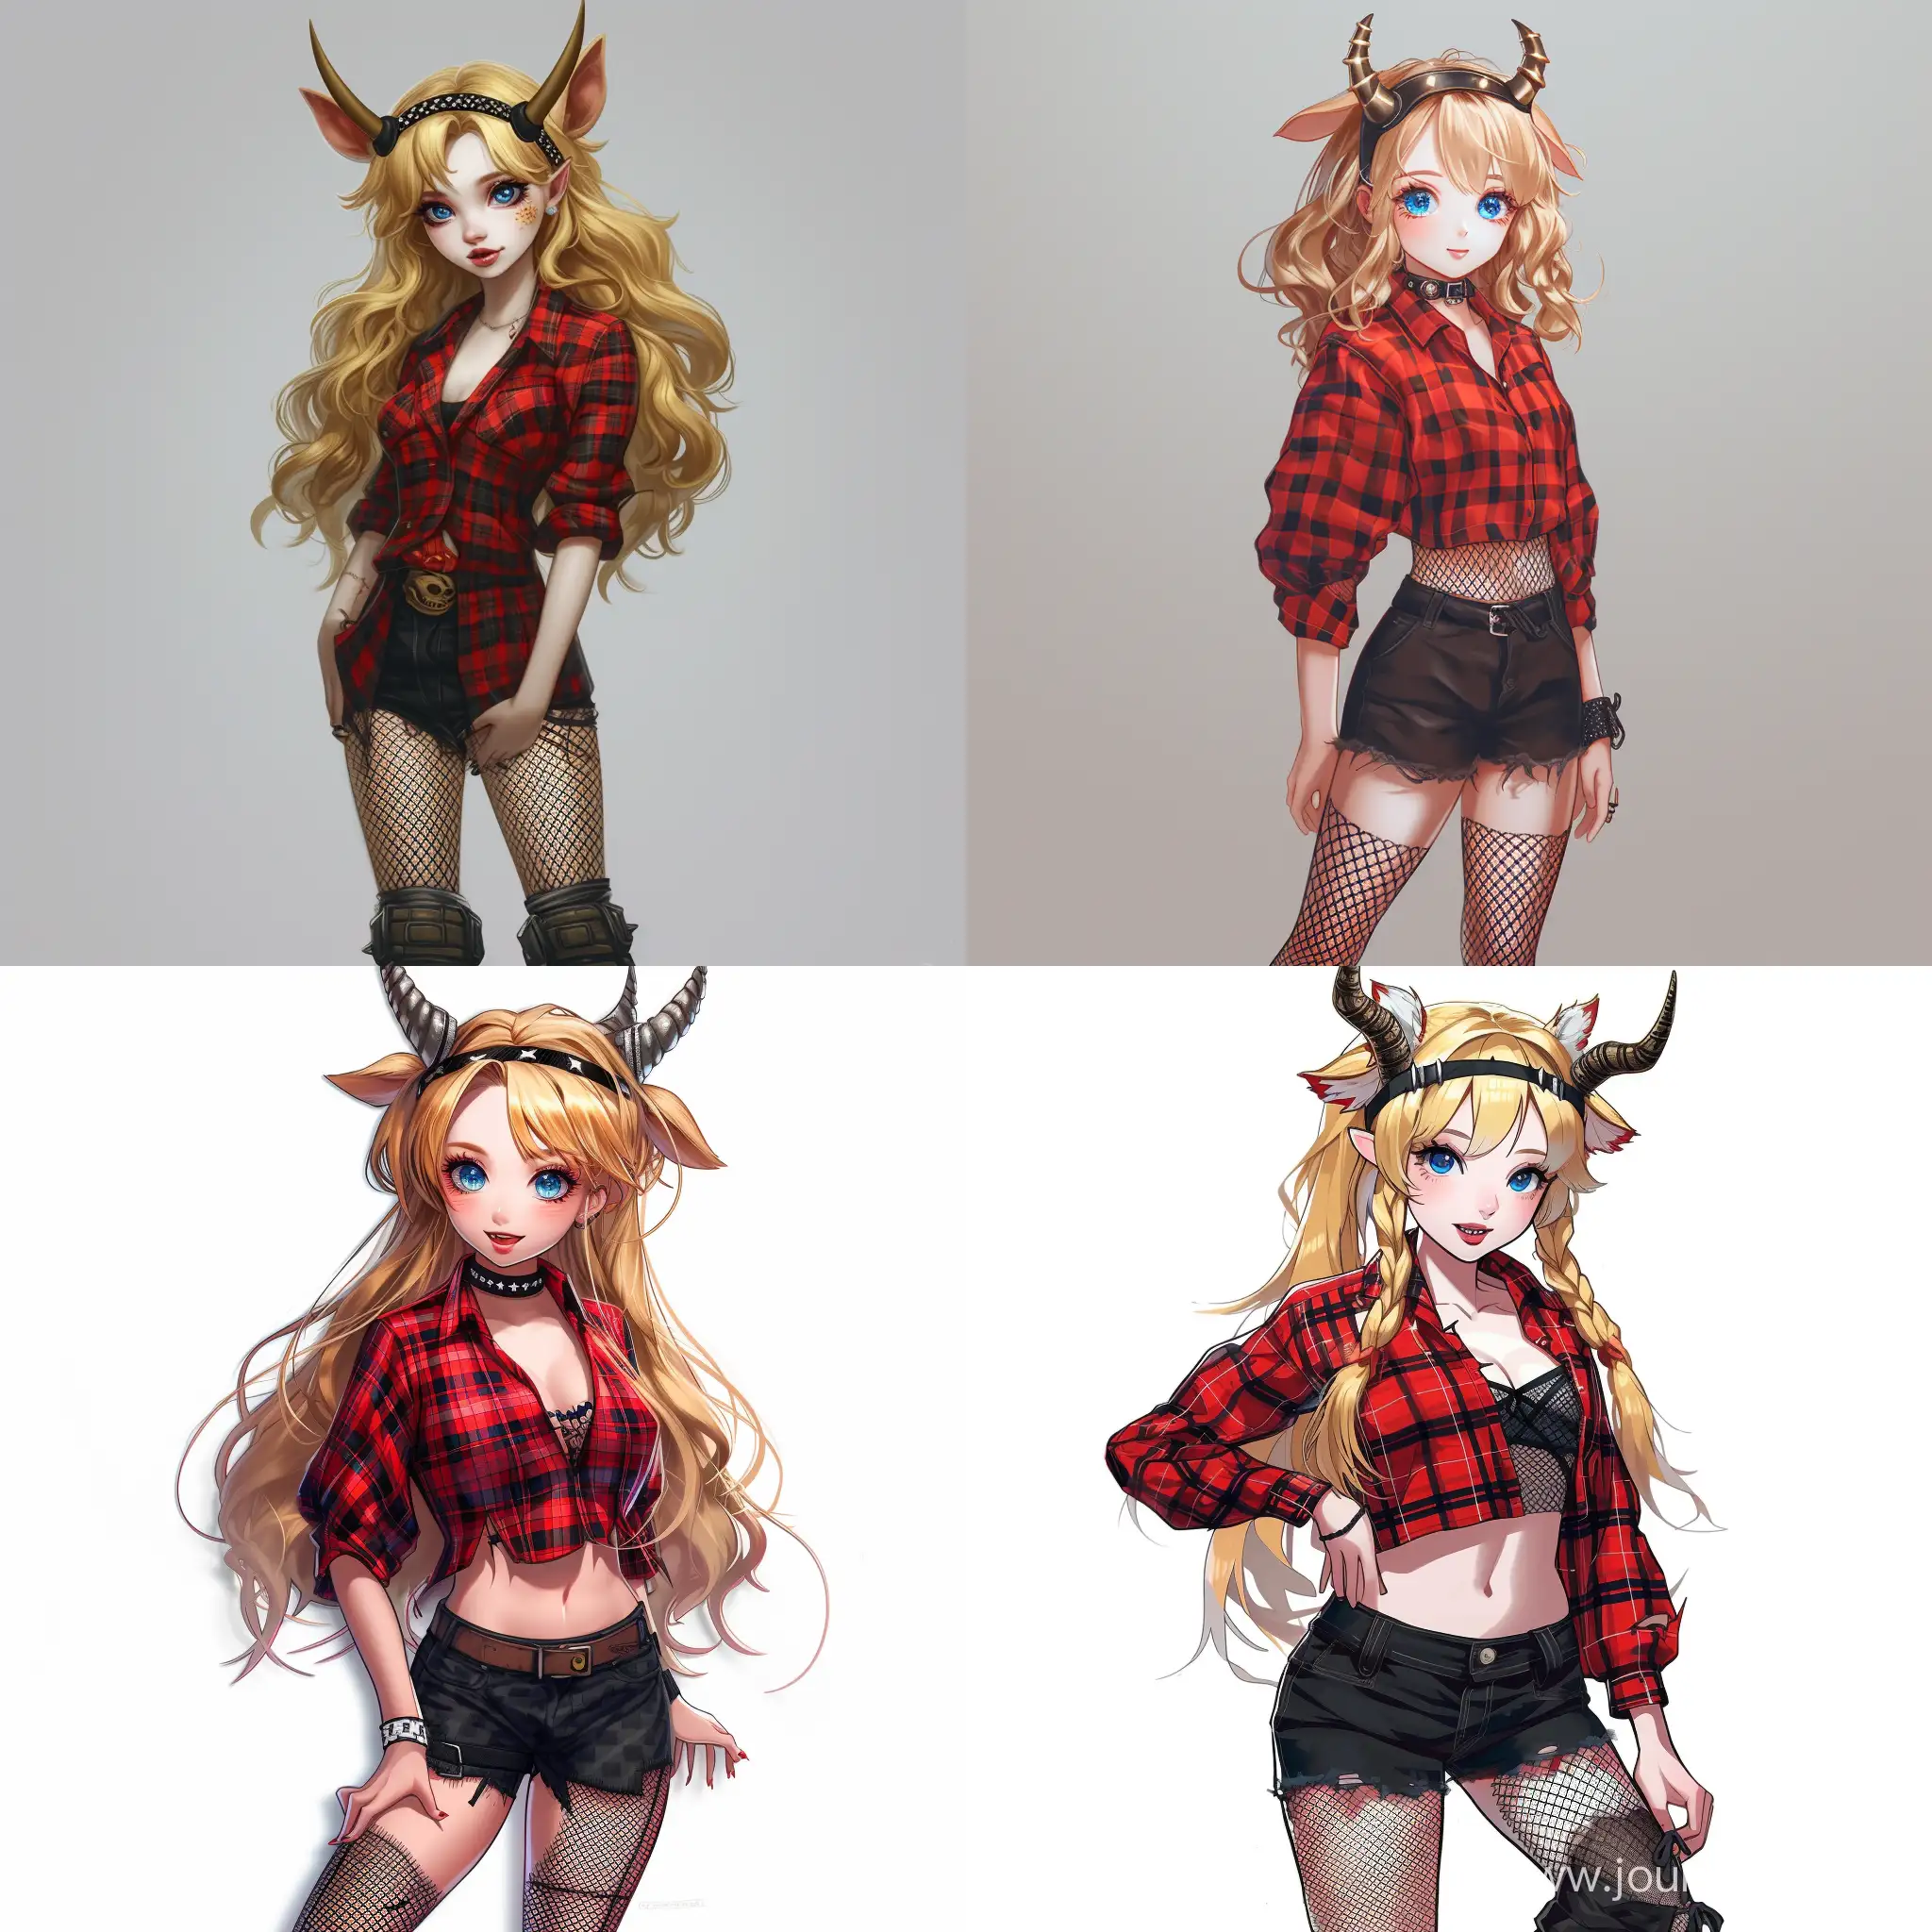 Beautiful girl, golden blonde hair, blue eyes, white skin, teenager, 15 years old, Halloween party, headband in the form of horns, red plaid shirt, top, black shorts, fishnet tights, heavy boots, high quality, high detail, cartoon art